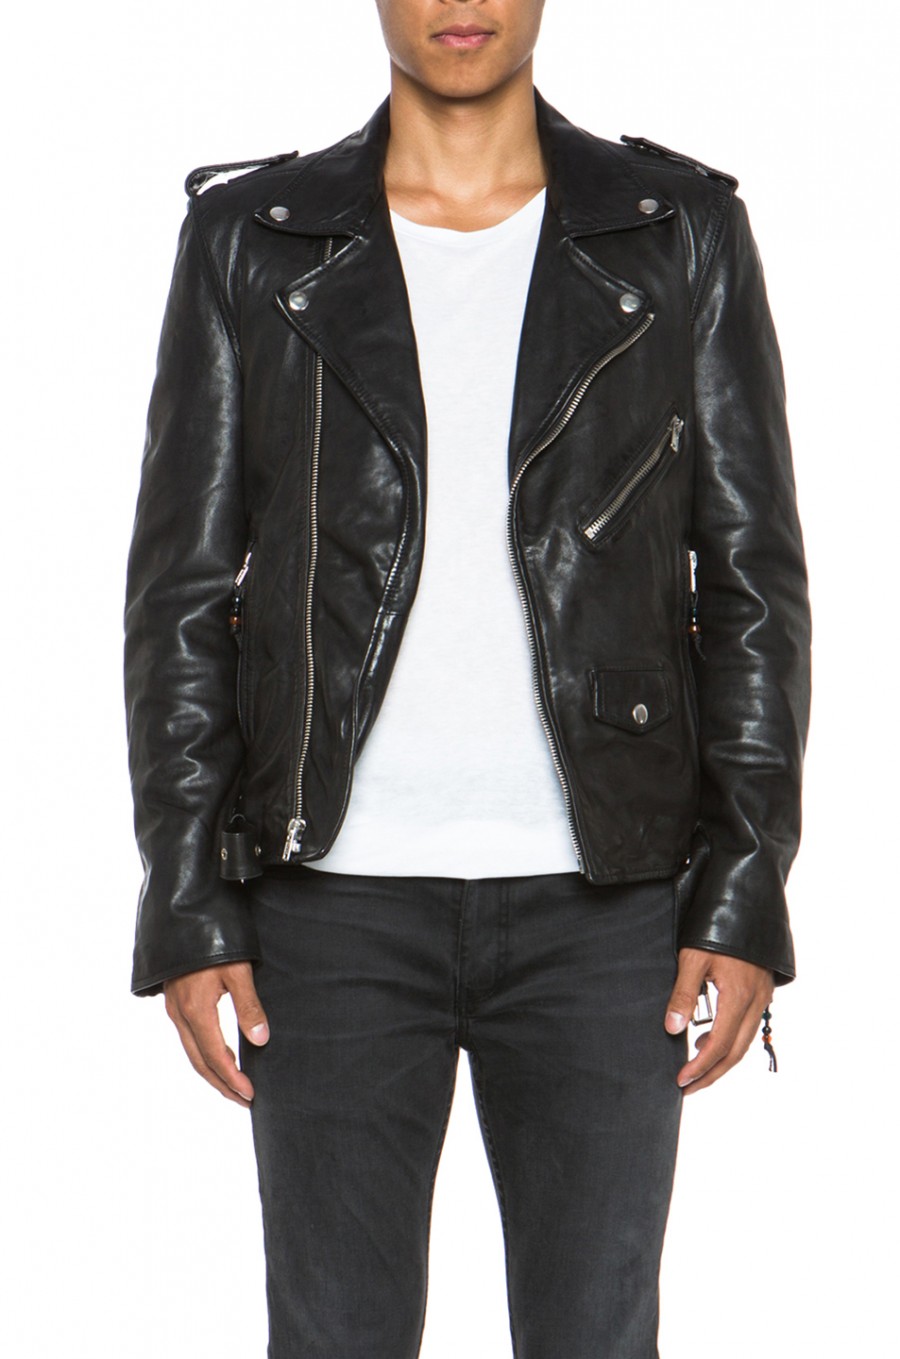 BLK DNM leather motorcycle jacket